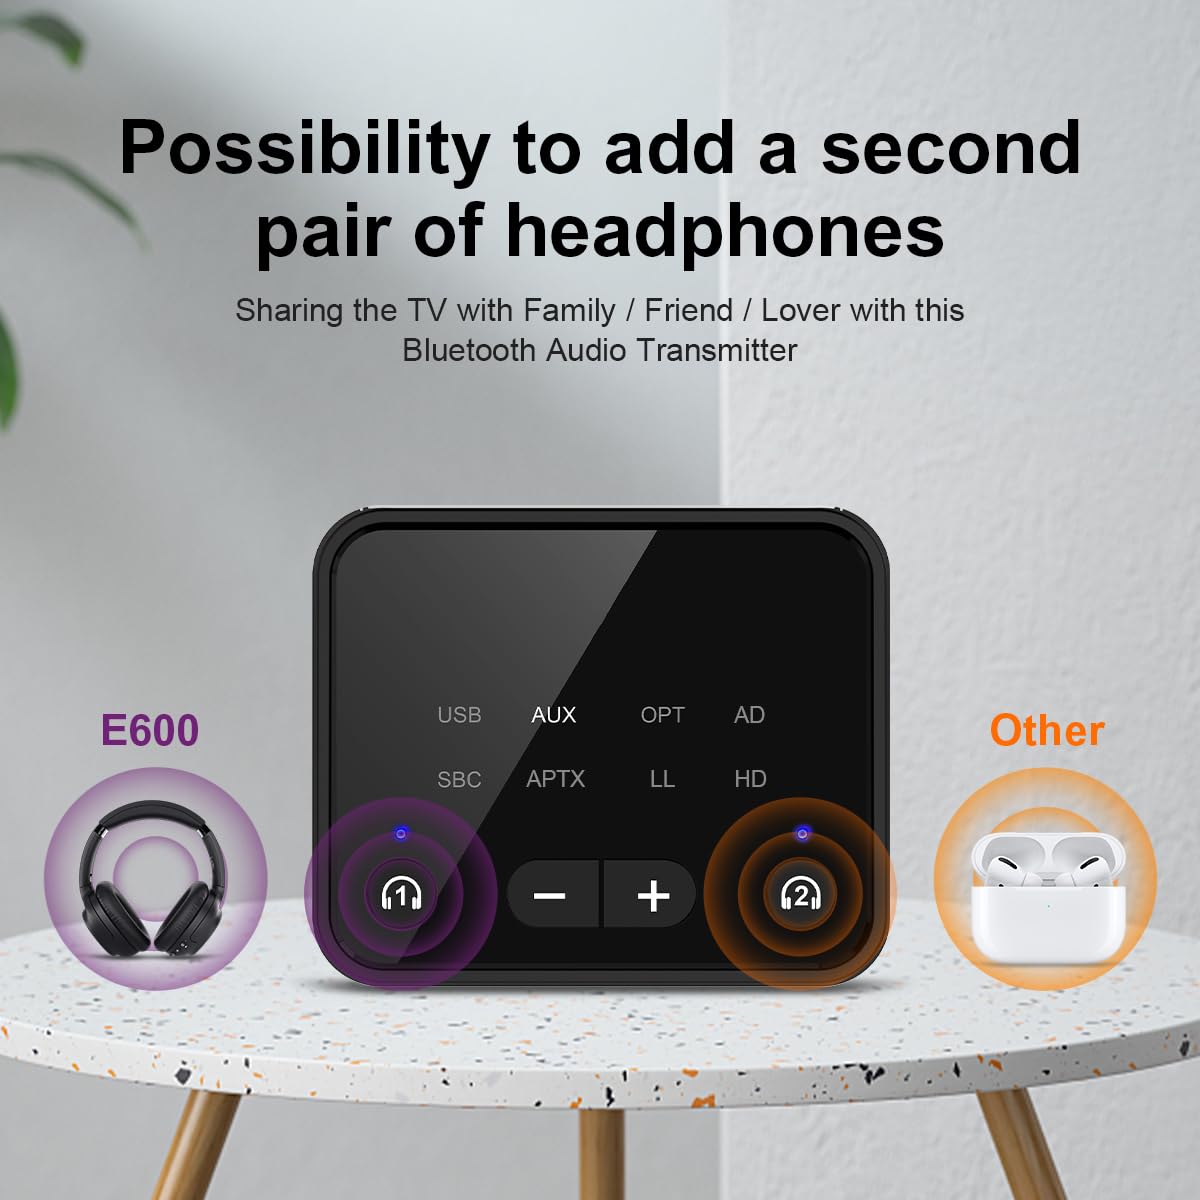 Soundodo TV Headphones Wireless,Wireless Headphones for tv Watching,Bluetooth Headphones with Transmitter with Optical,RCA,AUX,Plug n Play,50H Playtime,No Delay,Dual Link,165ft Long Range